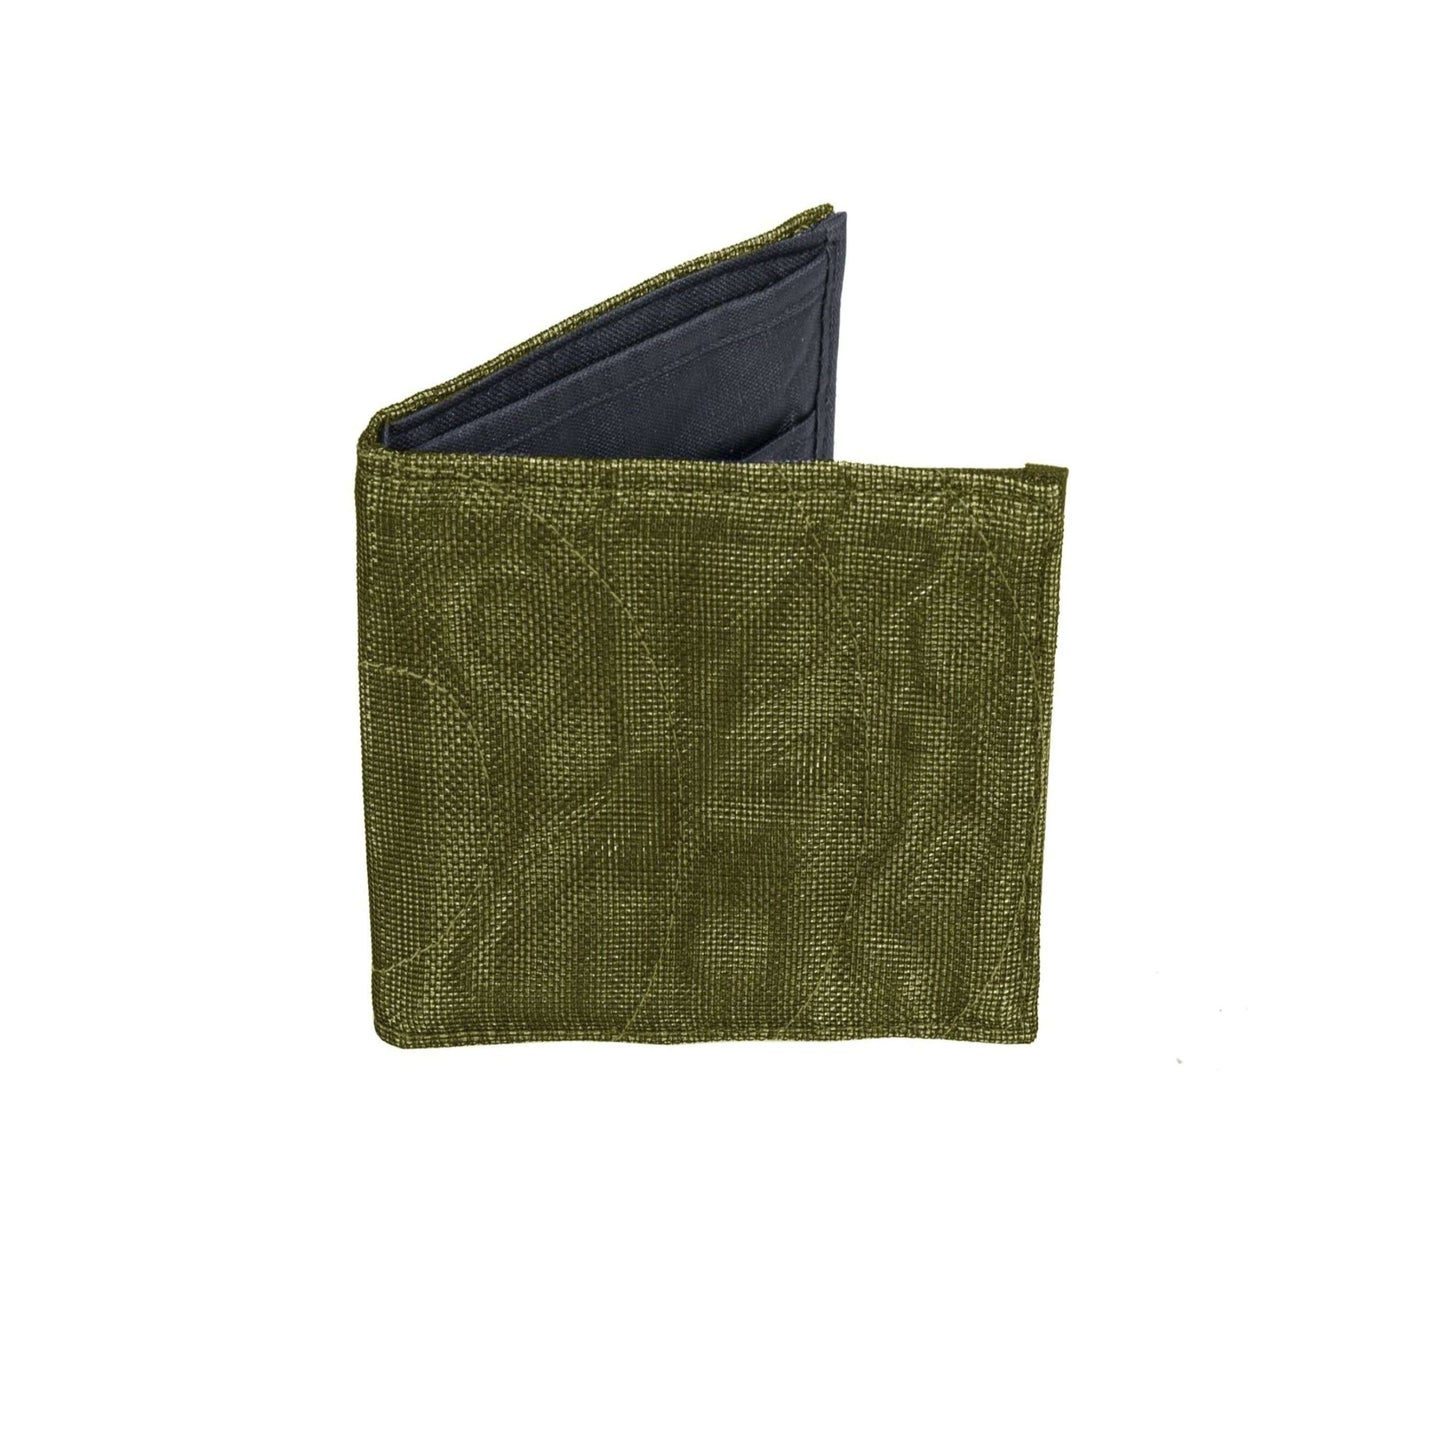 Colorful Light Weight Socially Responsible Wallets